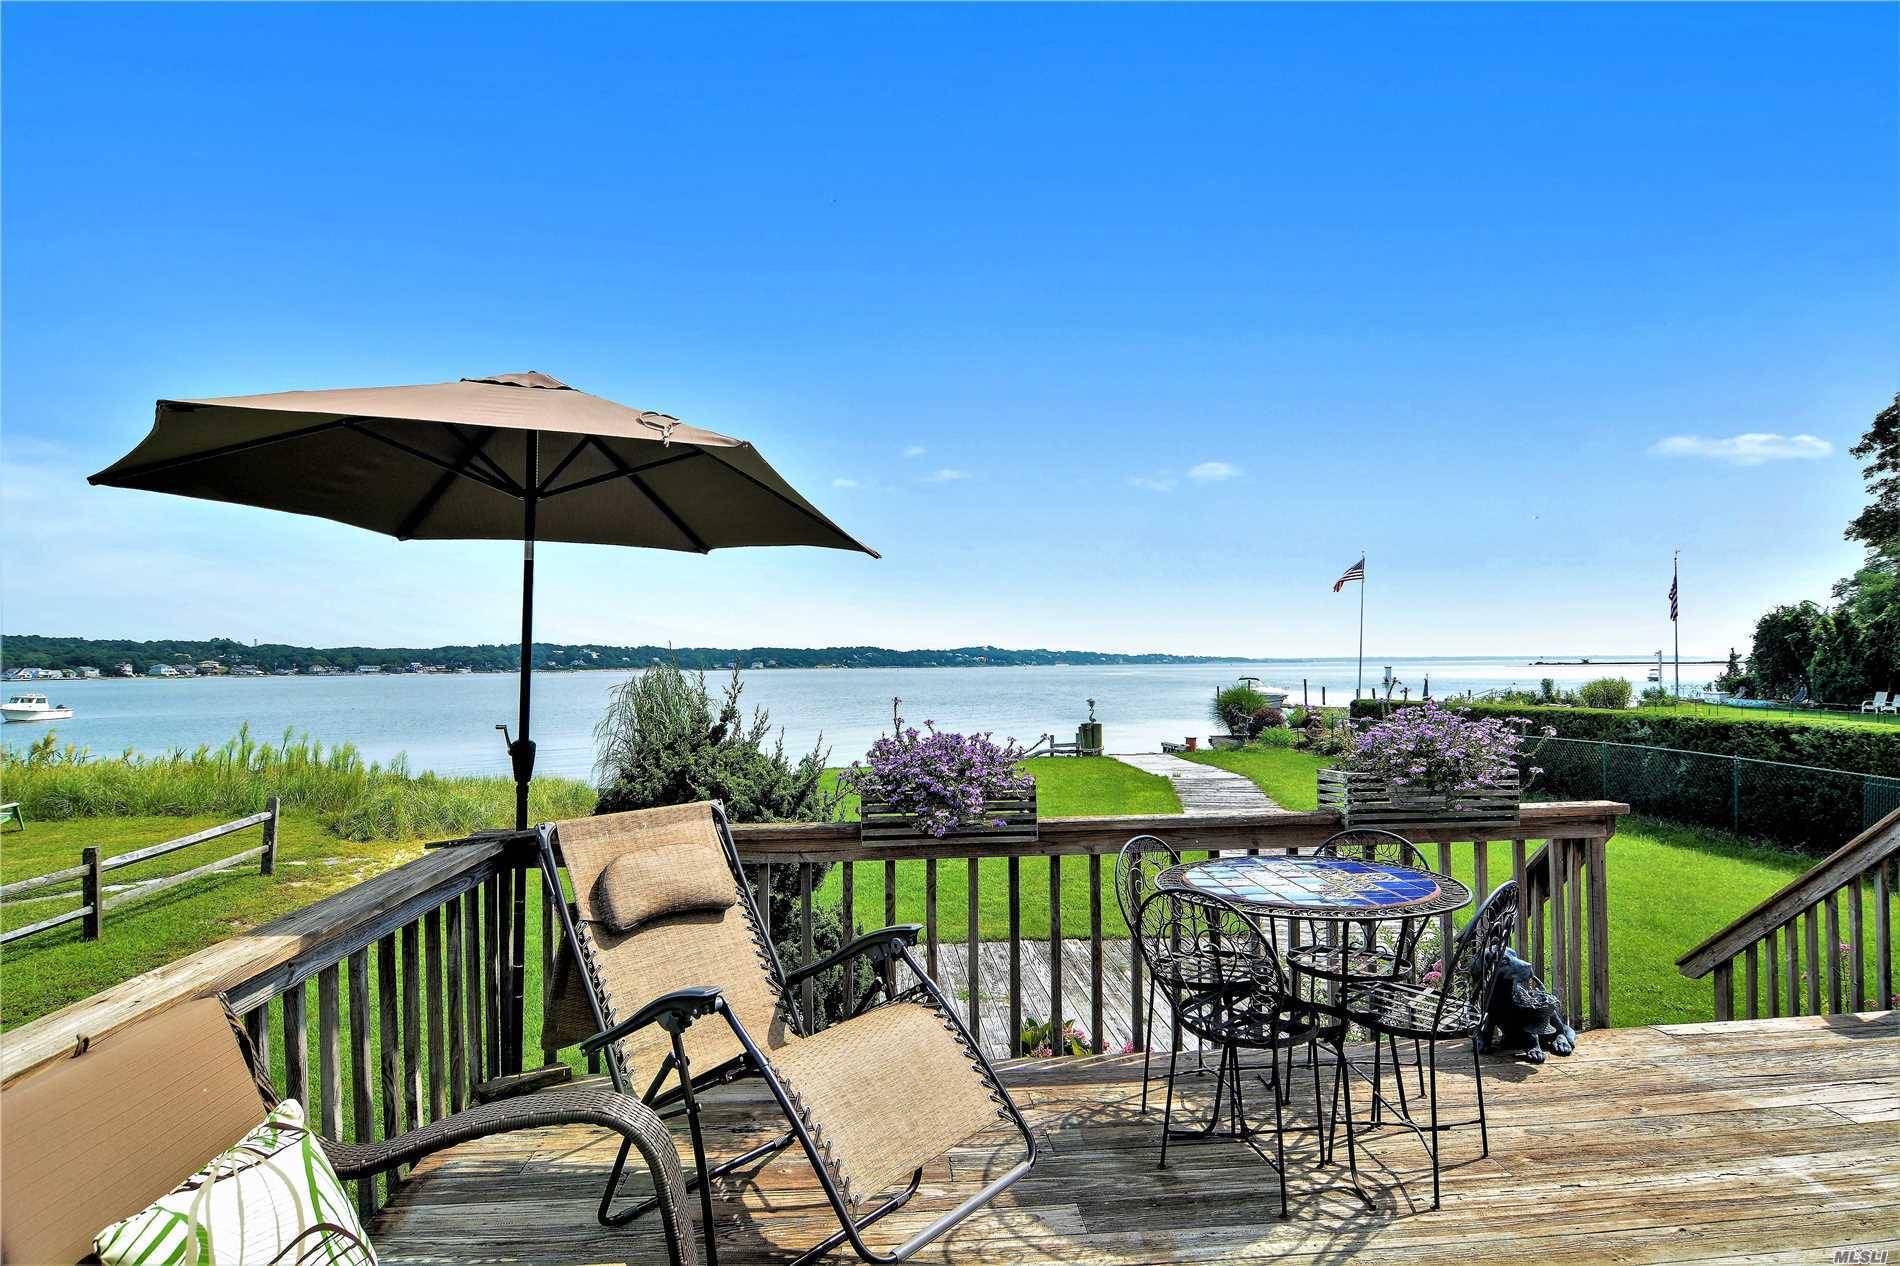 Fabulous Opportunity To Own A Spacious Waterfront Home With Incredible Views & Frontage.